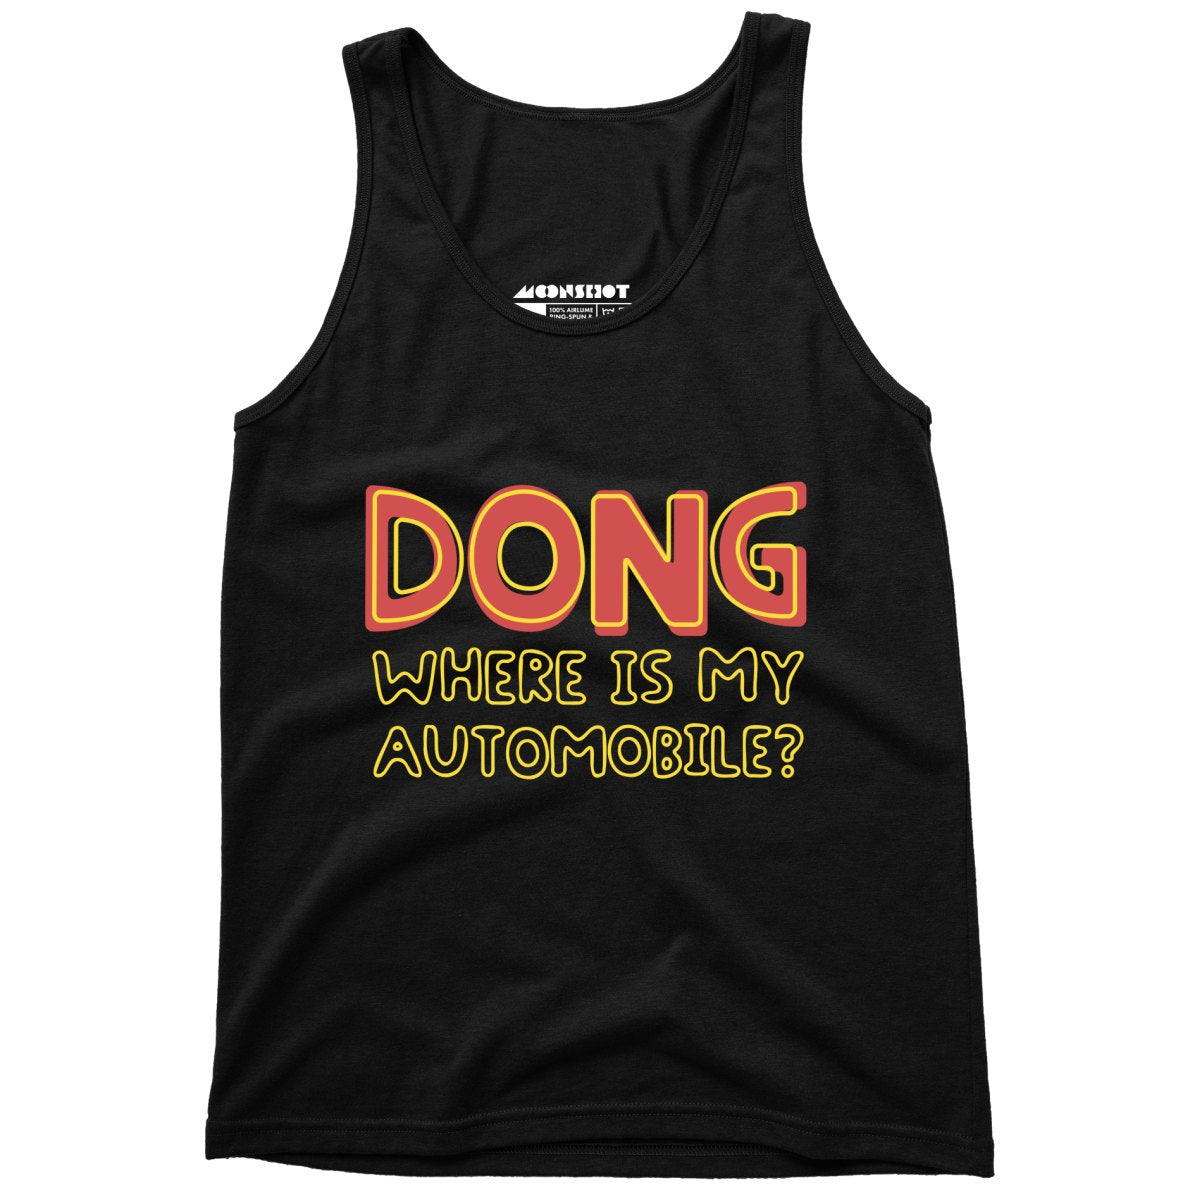 Dong Where is My Automobile? - Unisex Tank Top